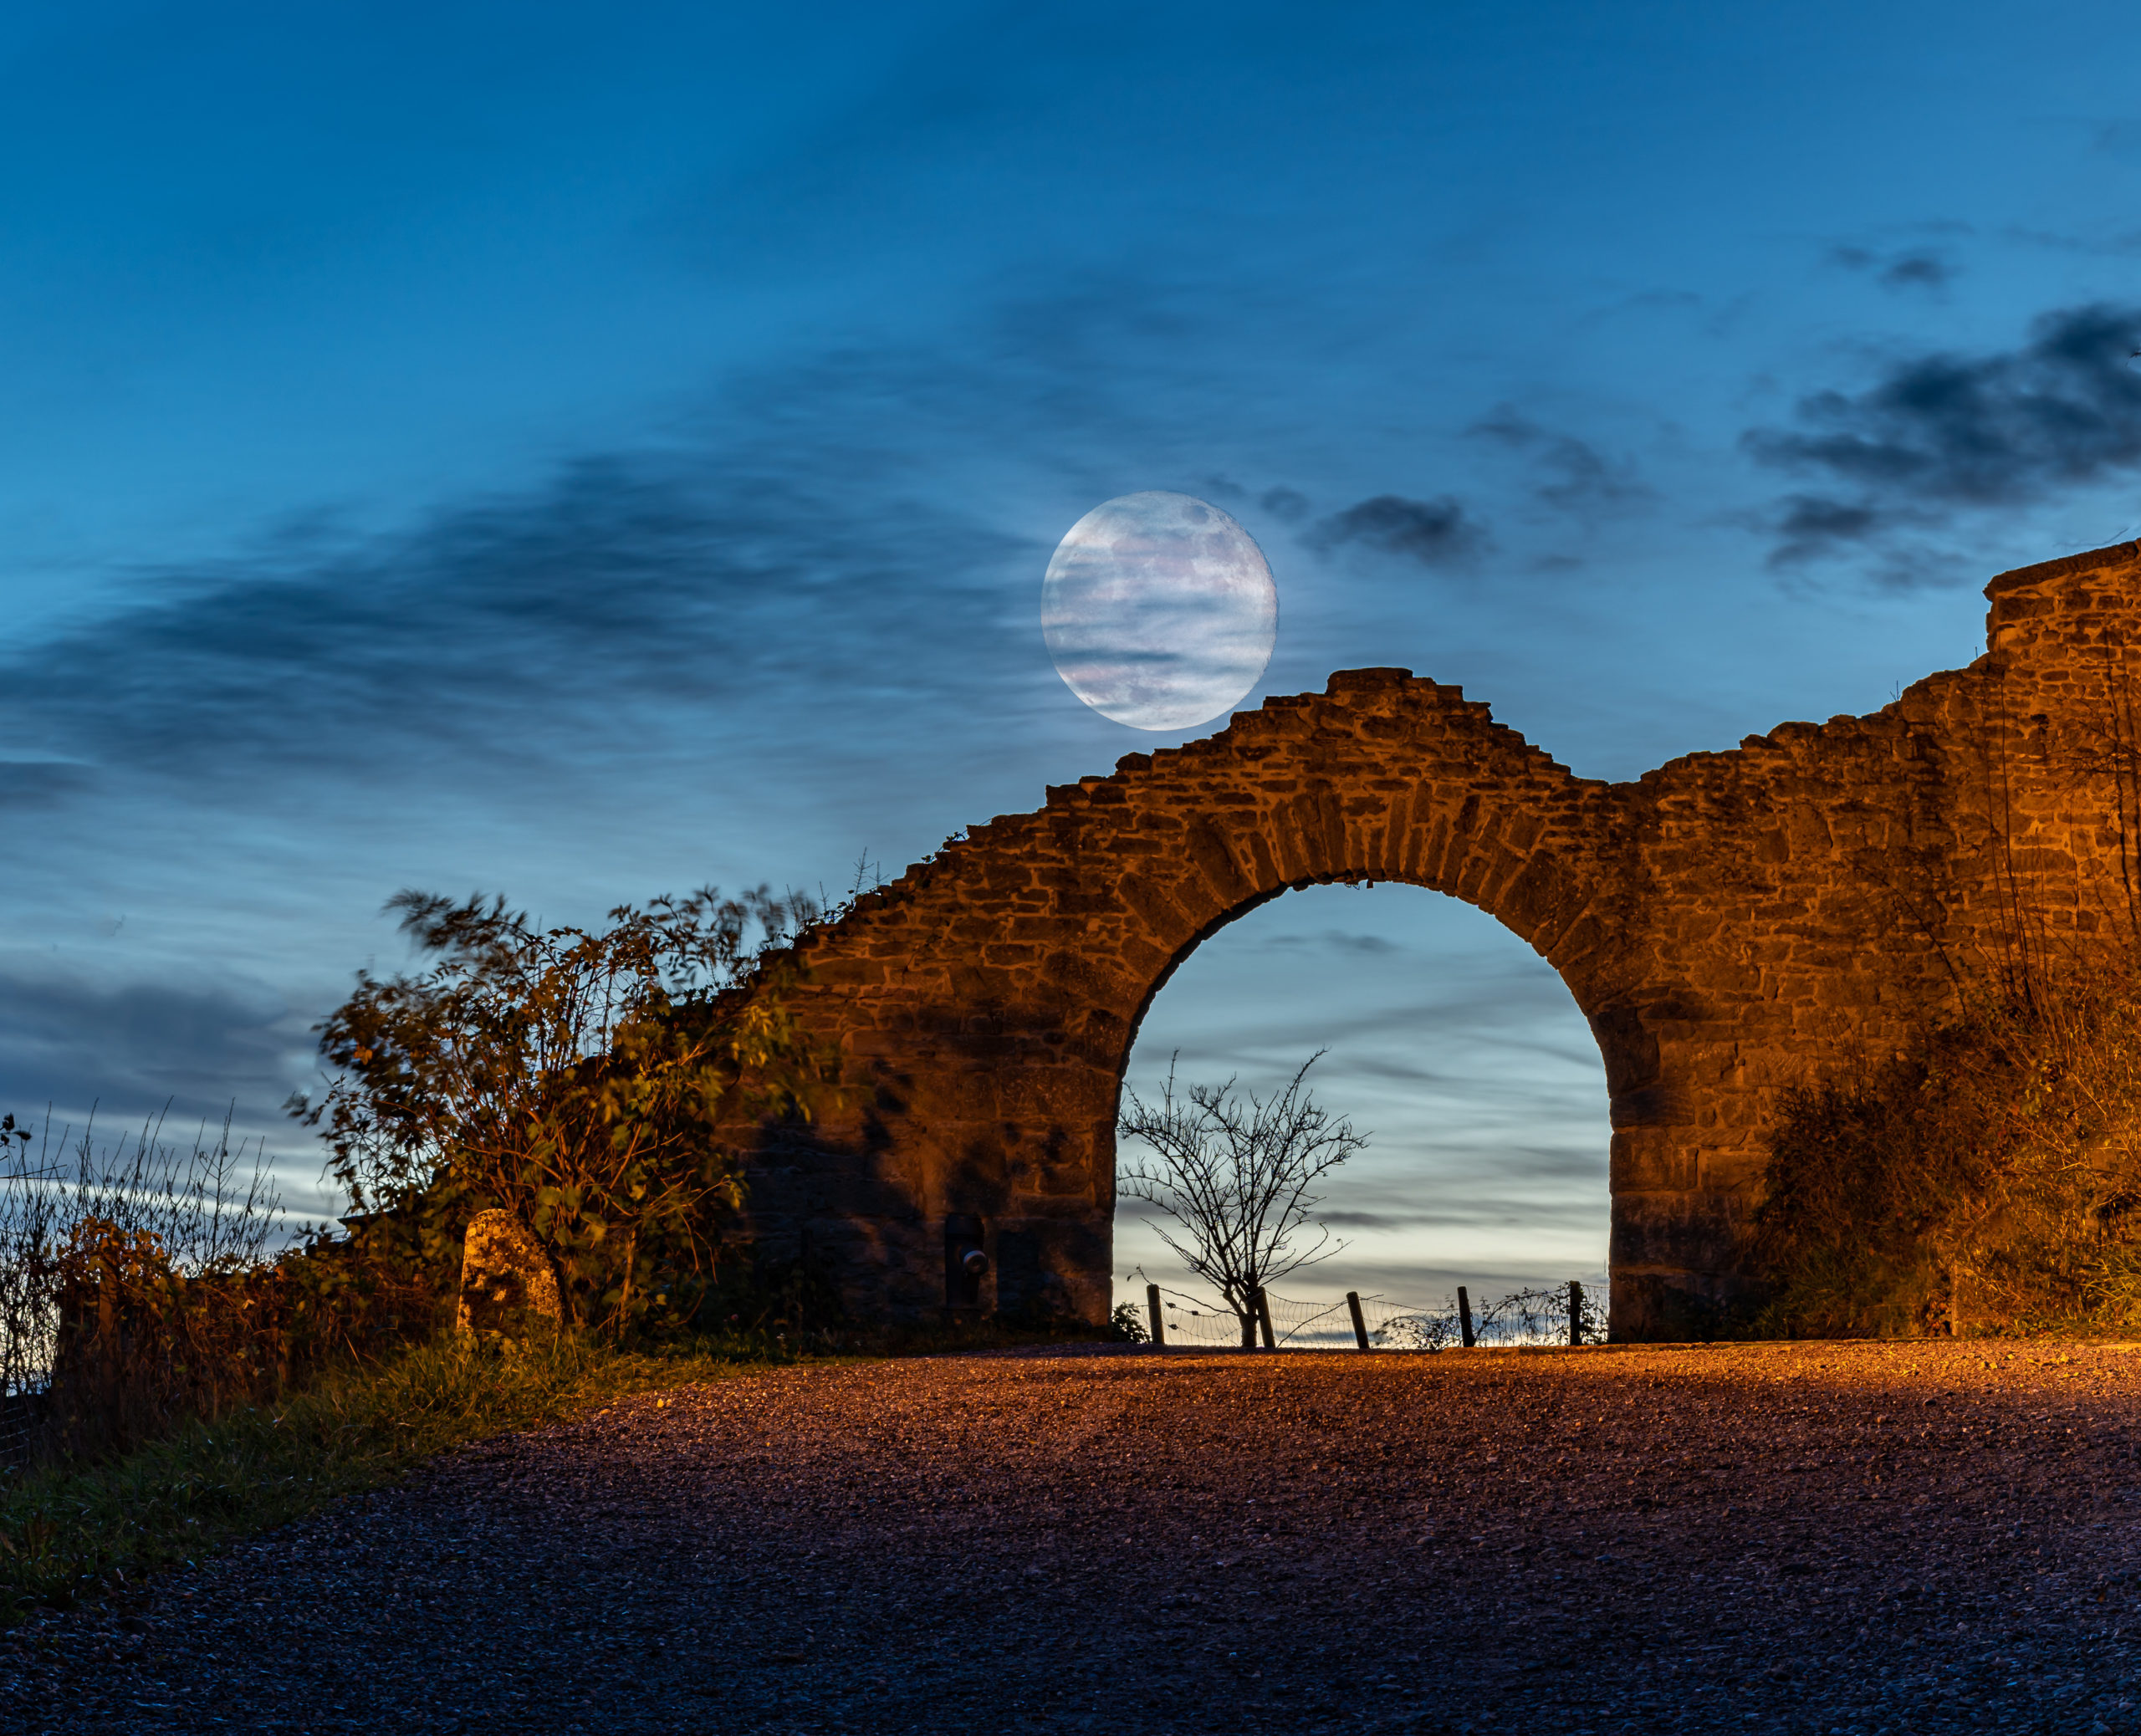 Archway with Moon - Lenzburg Castle at Night: Archway with Moon. 